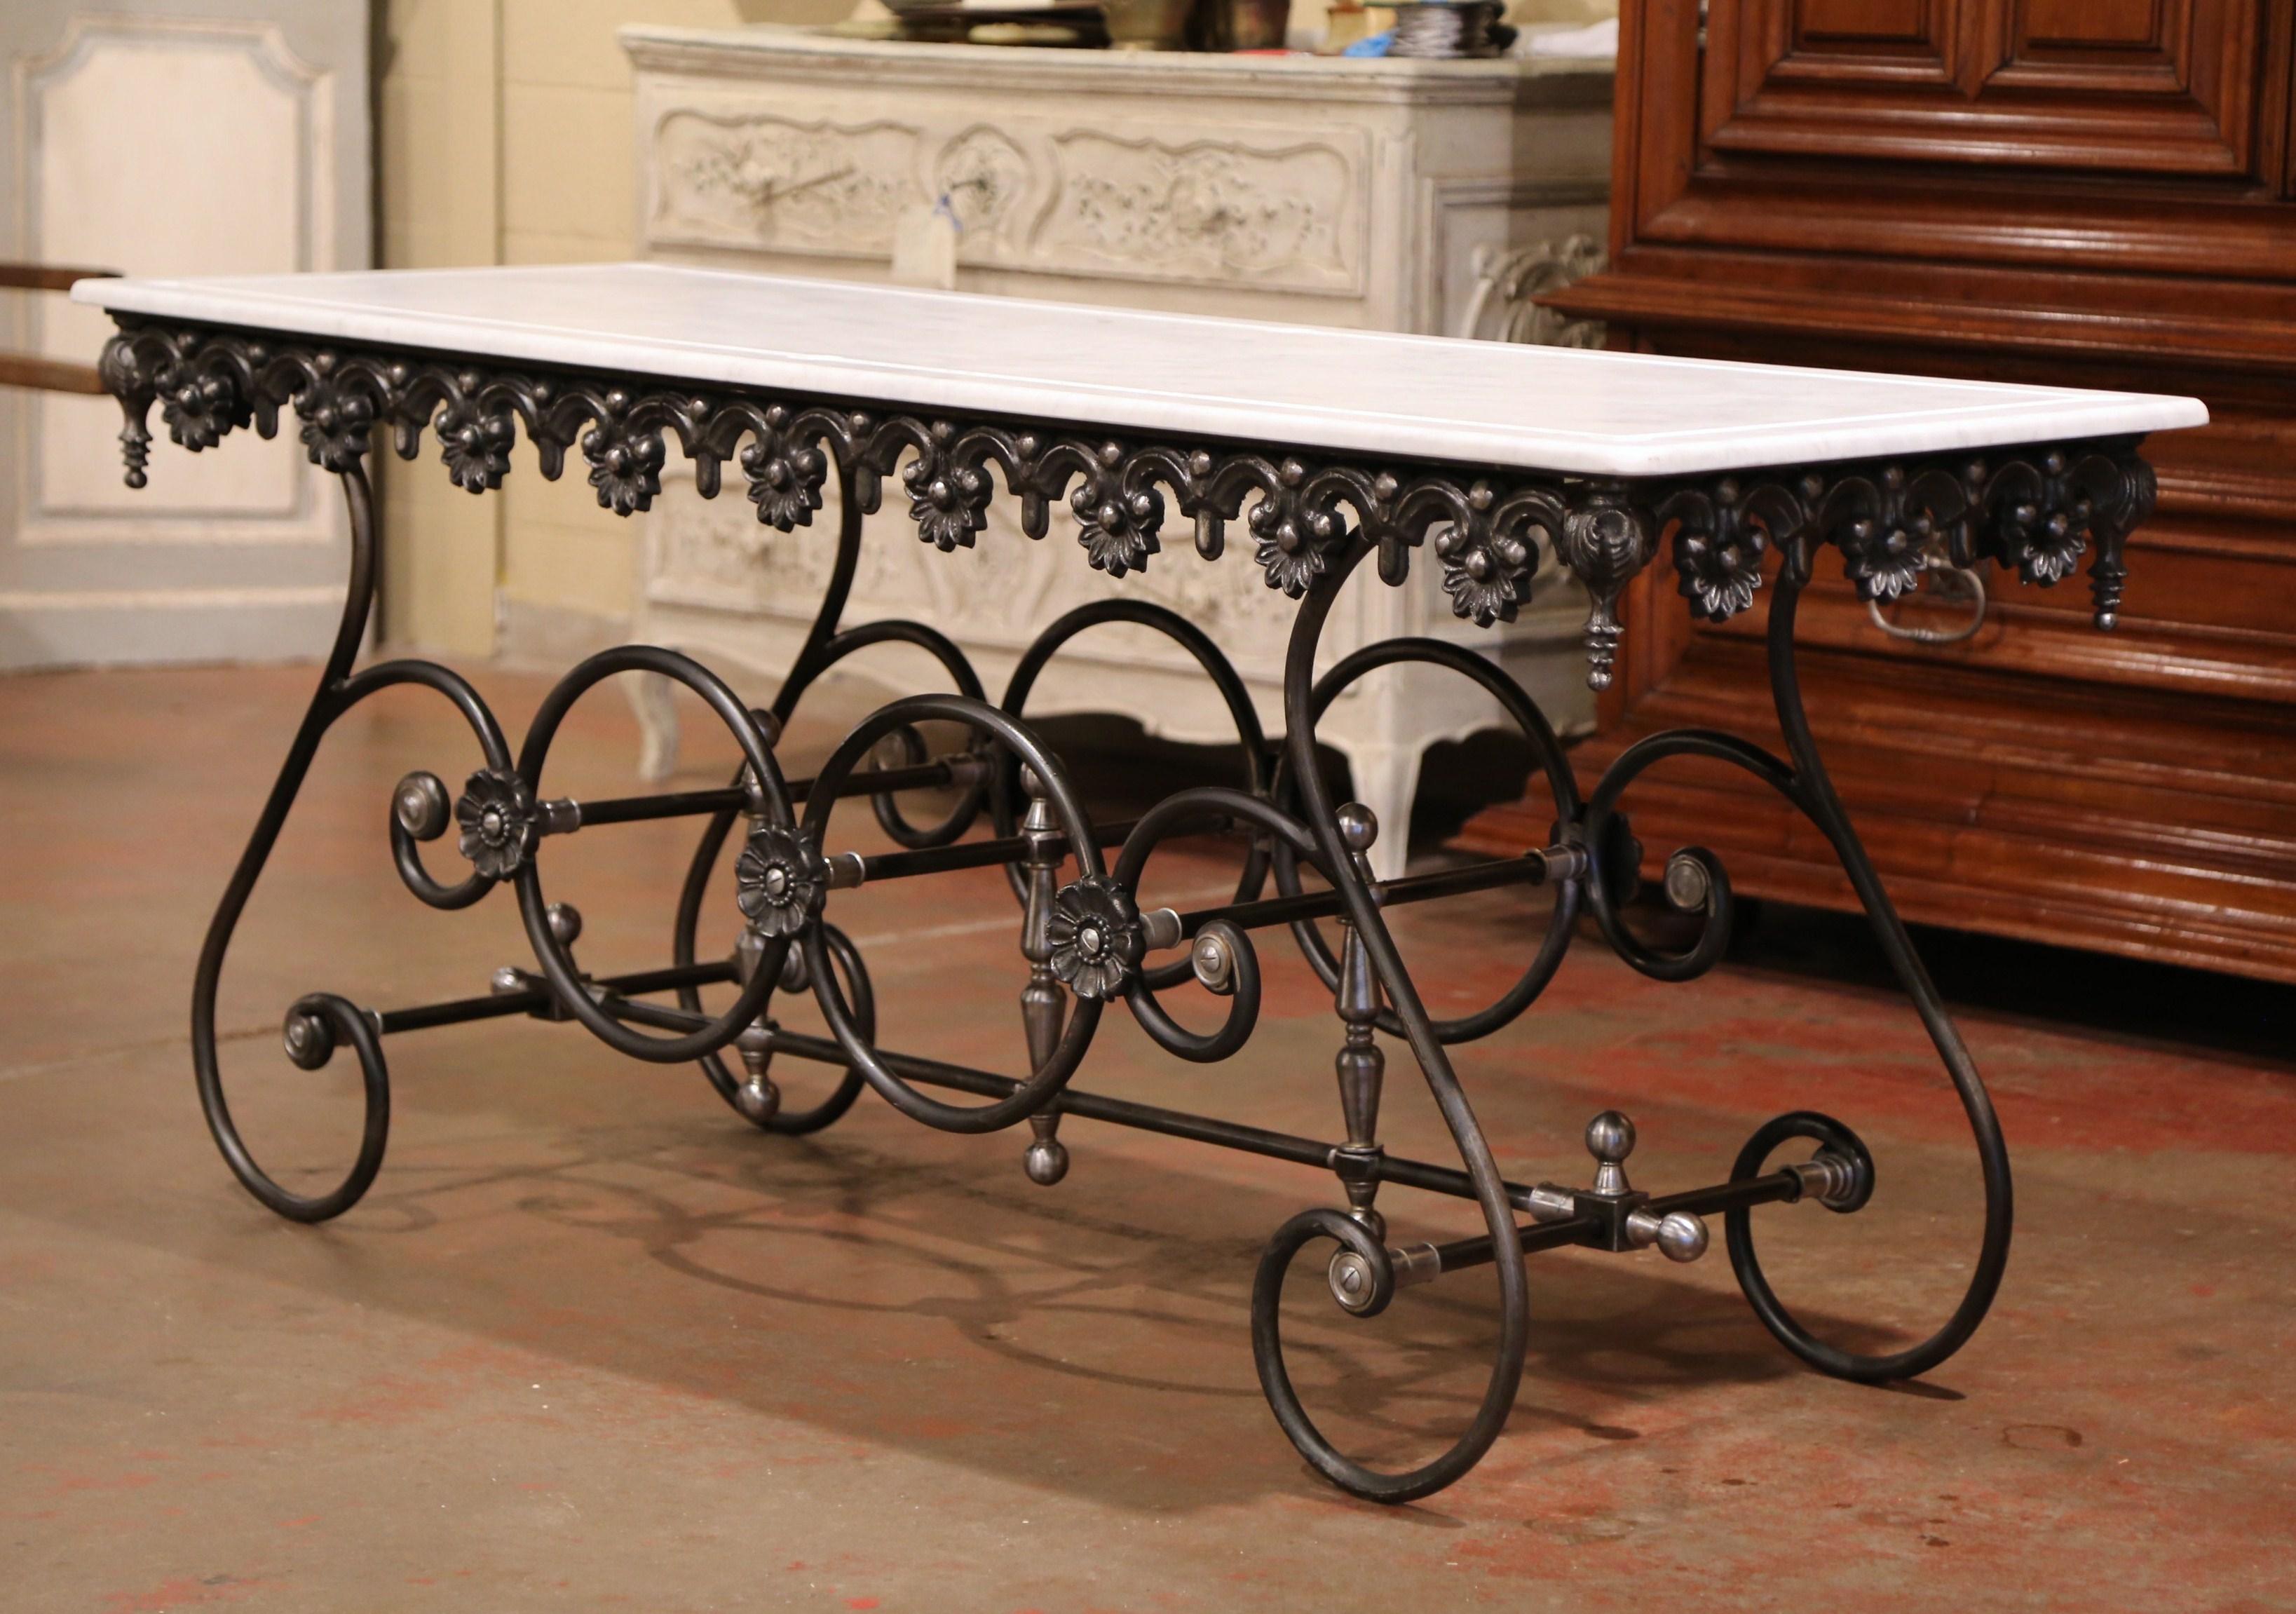 Polished Iron Butcher Pastry Table with Marble Top from France 1